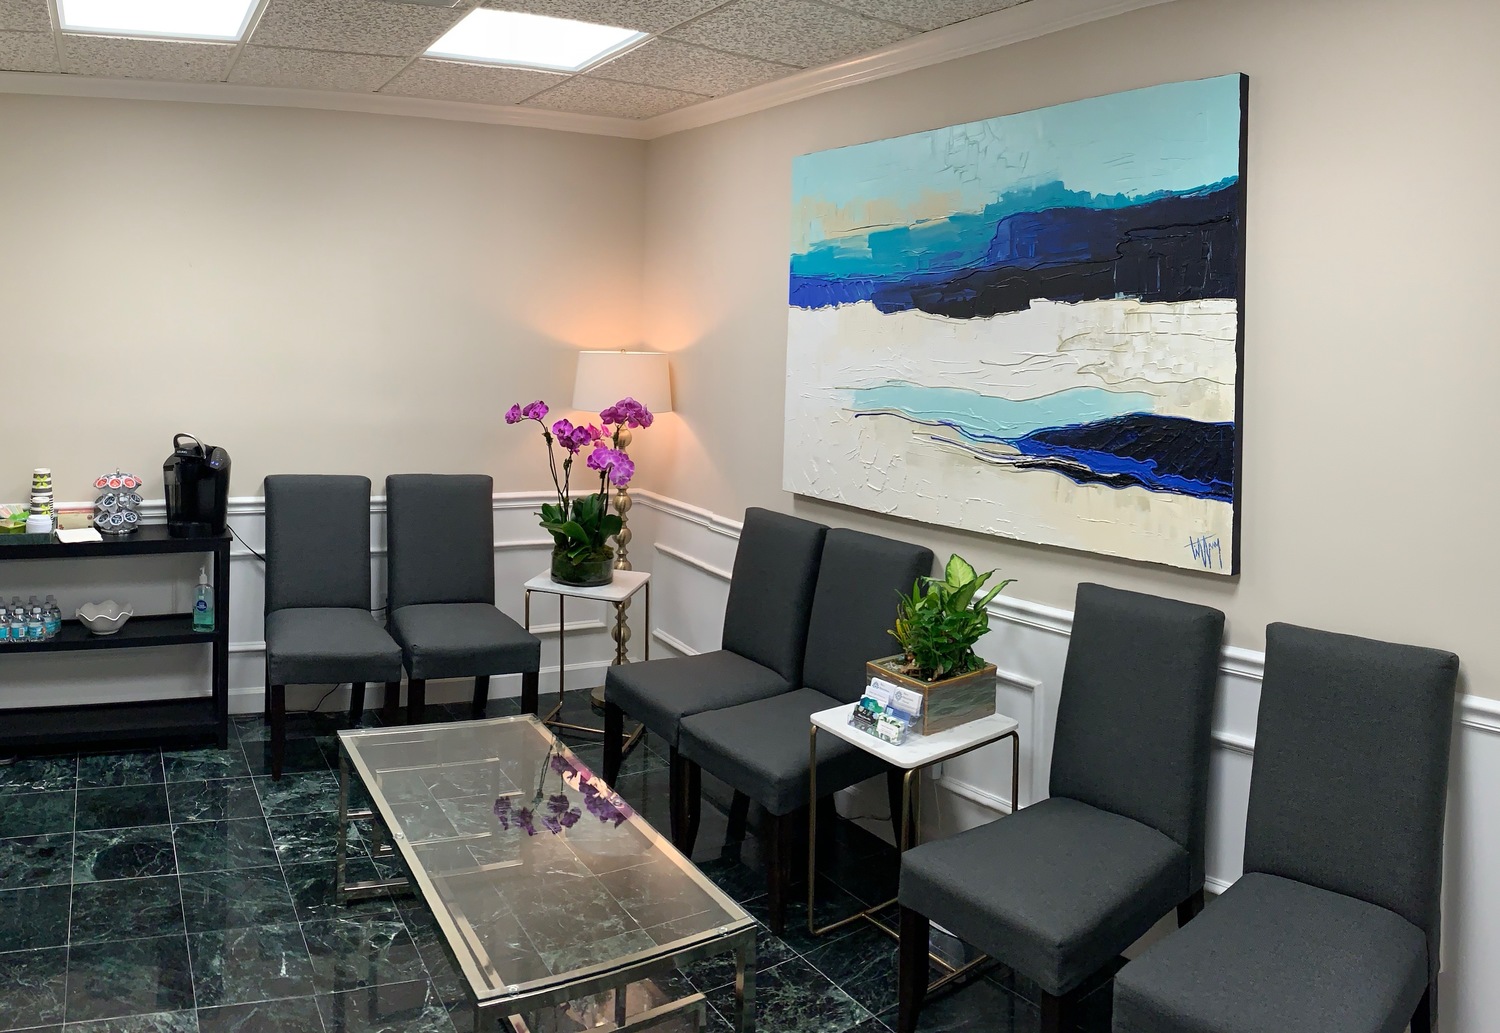 Gallery Photo of Comfortable reception area with complimentary beverages and soft music